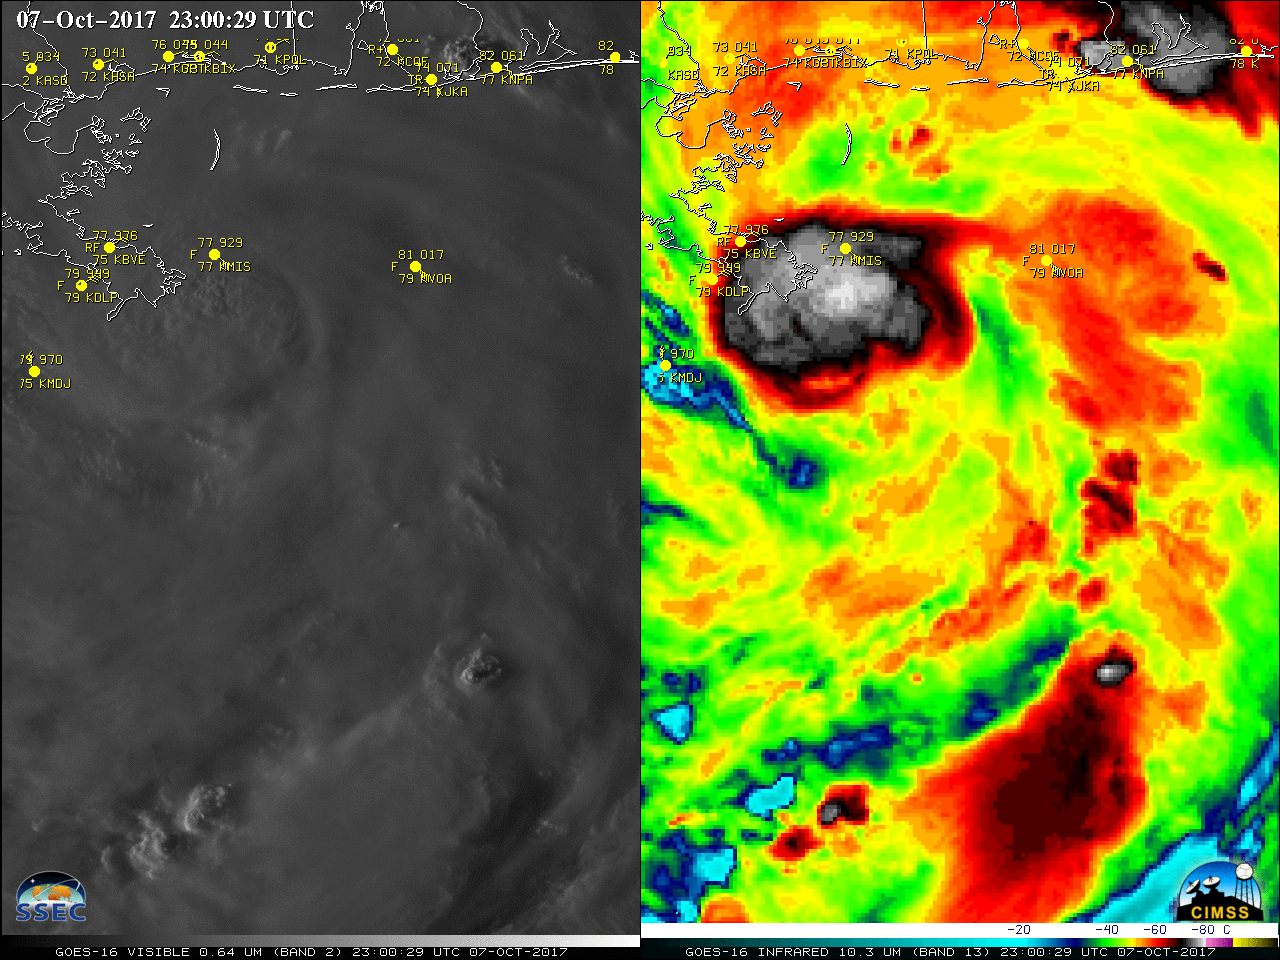 GOES-16 Visible (0.64 µm. left) and Infrared Window (10.3 µm, right) images, with hourly surface reports plotted in yellow [click to play MP4 animation]